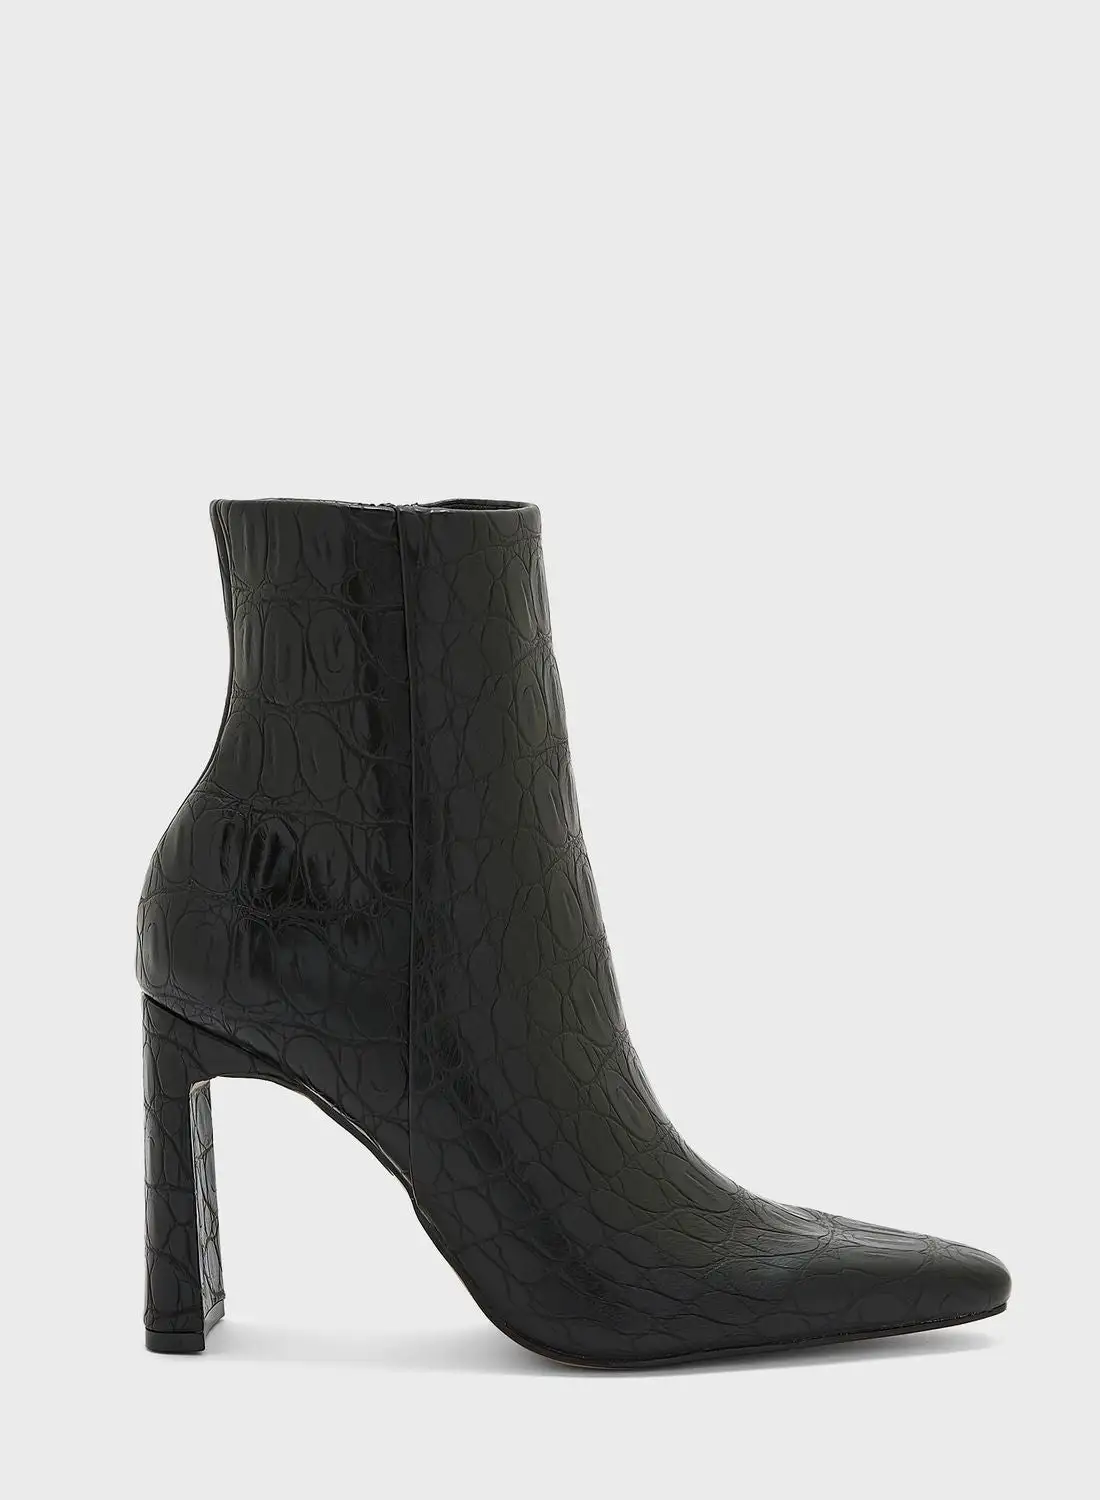 TOPSHOP Ophelia Ankle Boots